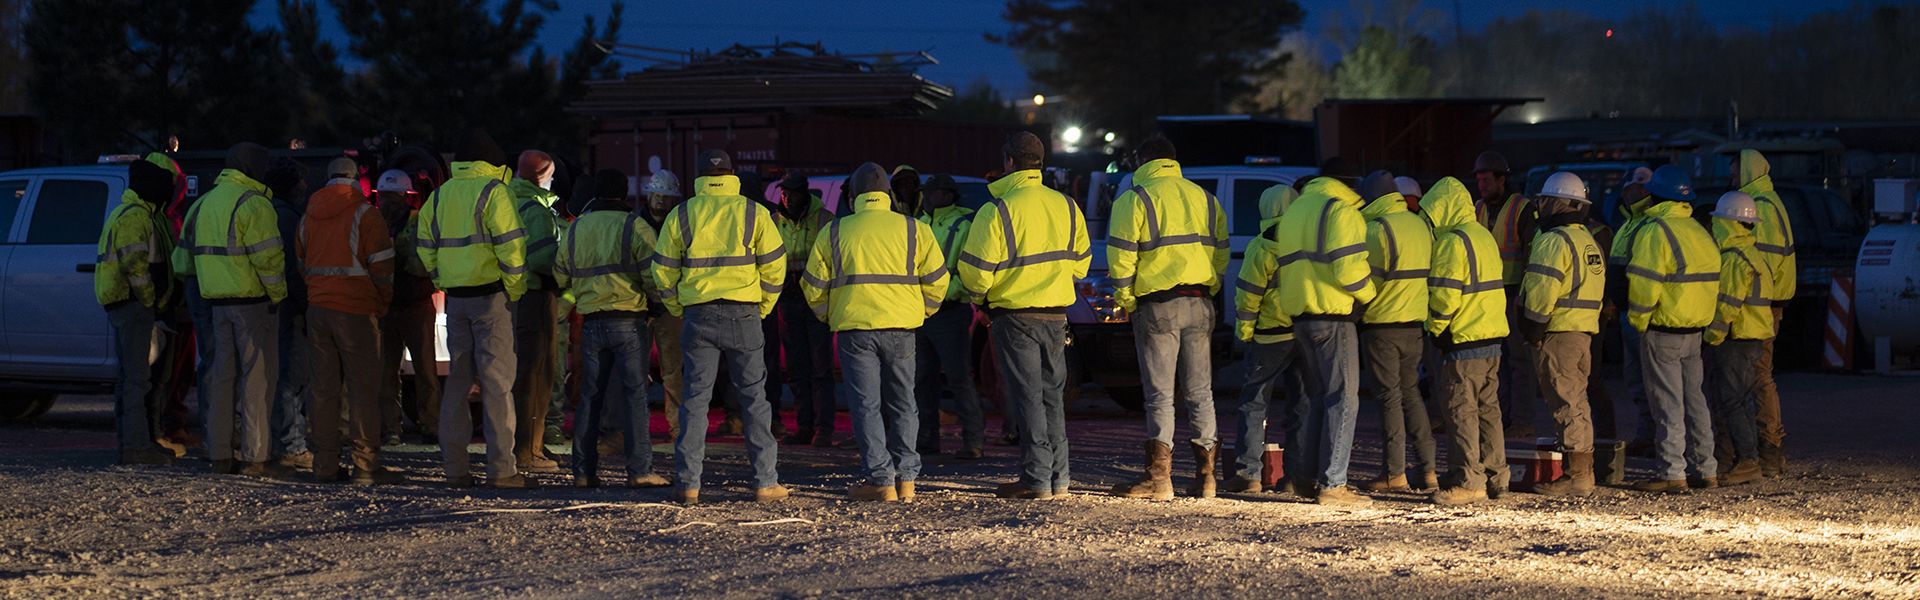 Road construction workers lined up on site wearing yellow attire in their Georgia construction careers